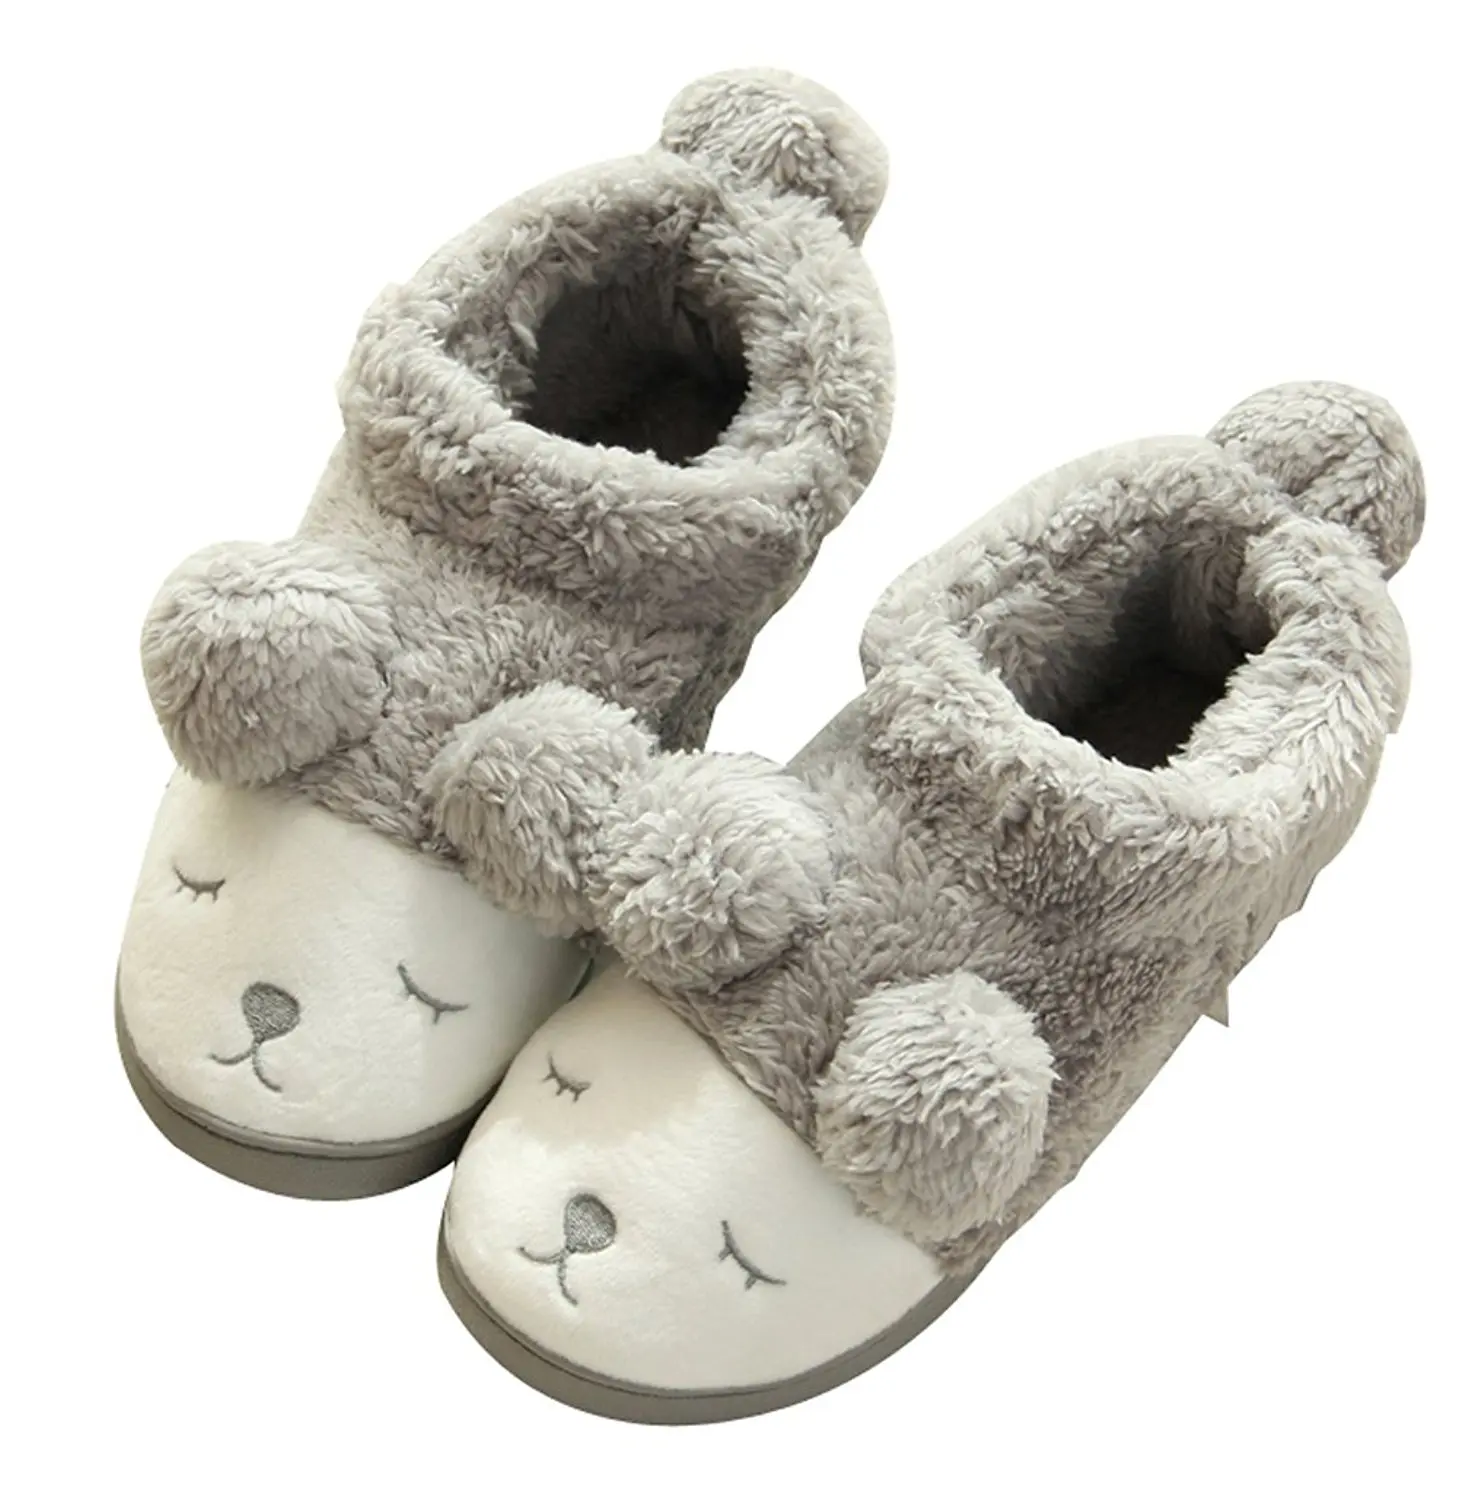 Cheap Fuzzy Slipper Boots, find Fuzzy Slipper Boots deals on line at ...